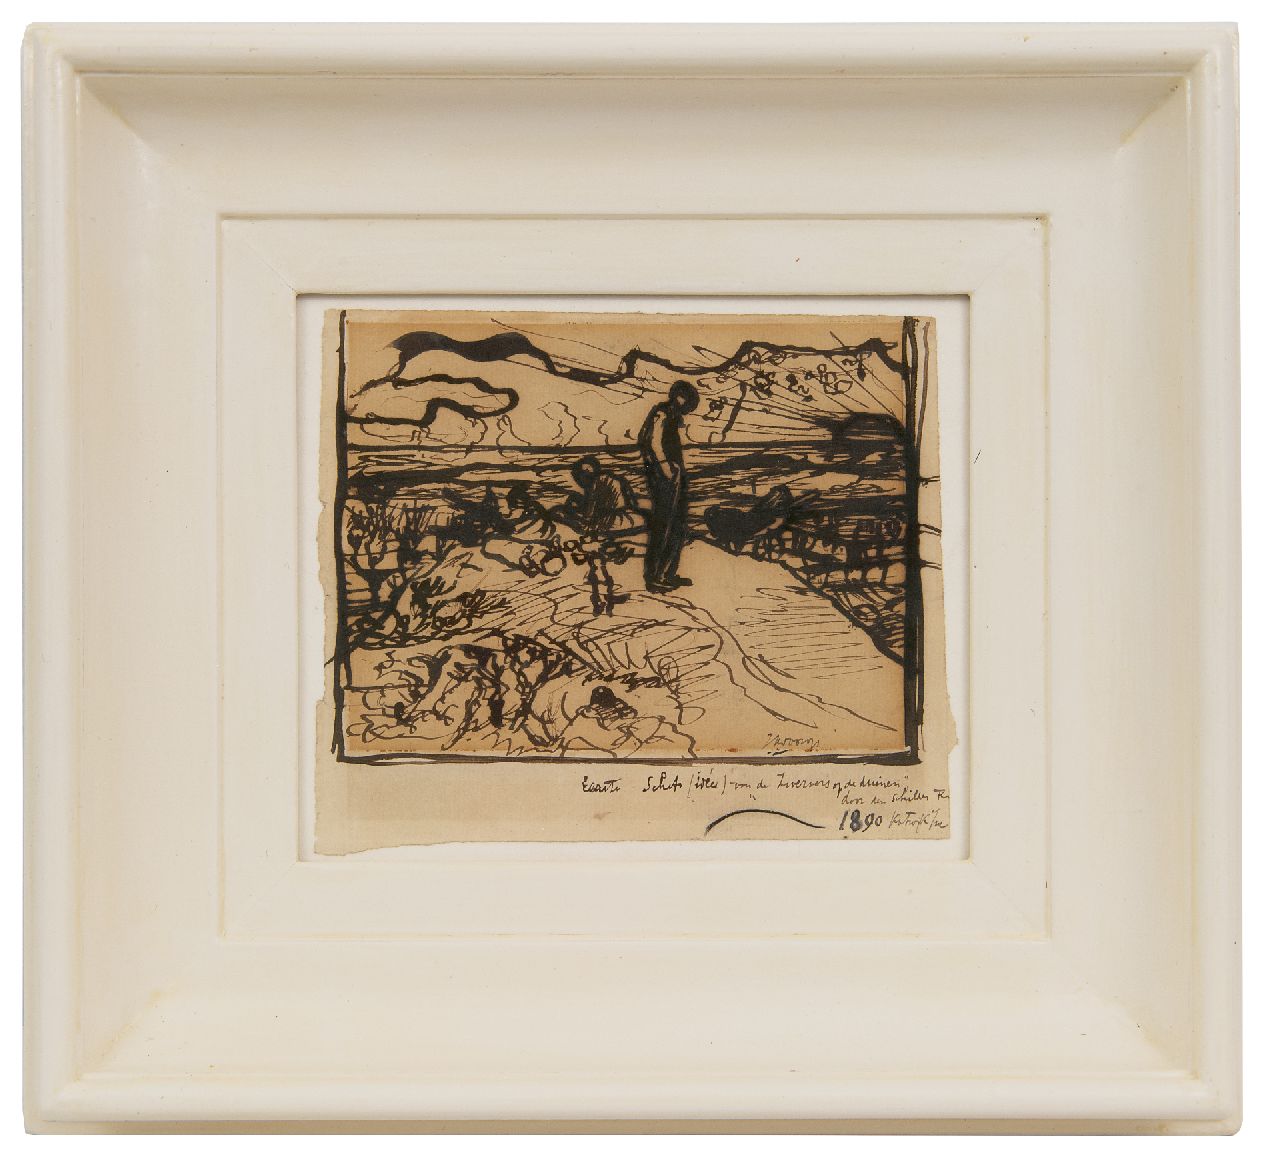 Toorop J.Th.  | Johannes Theodorus 'Jan' Toorop | Watercolours and drawings offered for sale | Vagabonds in the dunes, pen and ink on paper 12.1 x 14.4 cm, signed l.r. and dated l.m. 1890